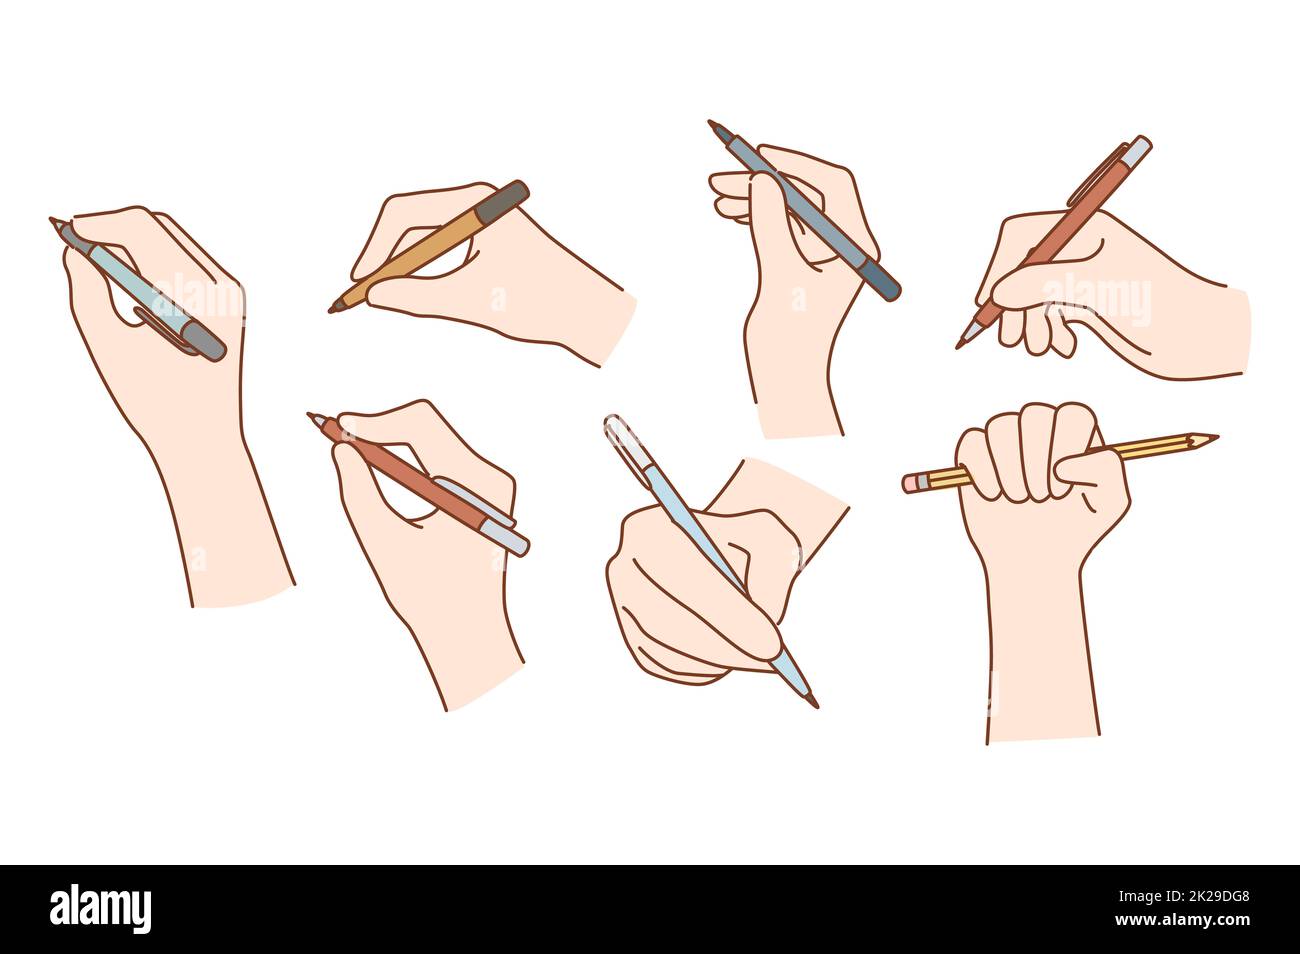 Set of hands with pens or pencils writing Stock Photo